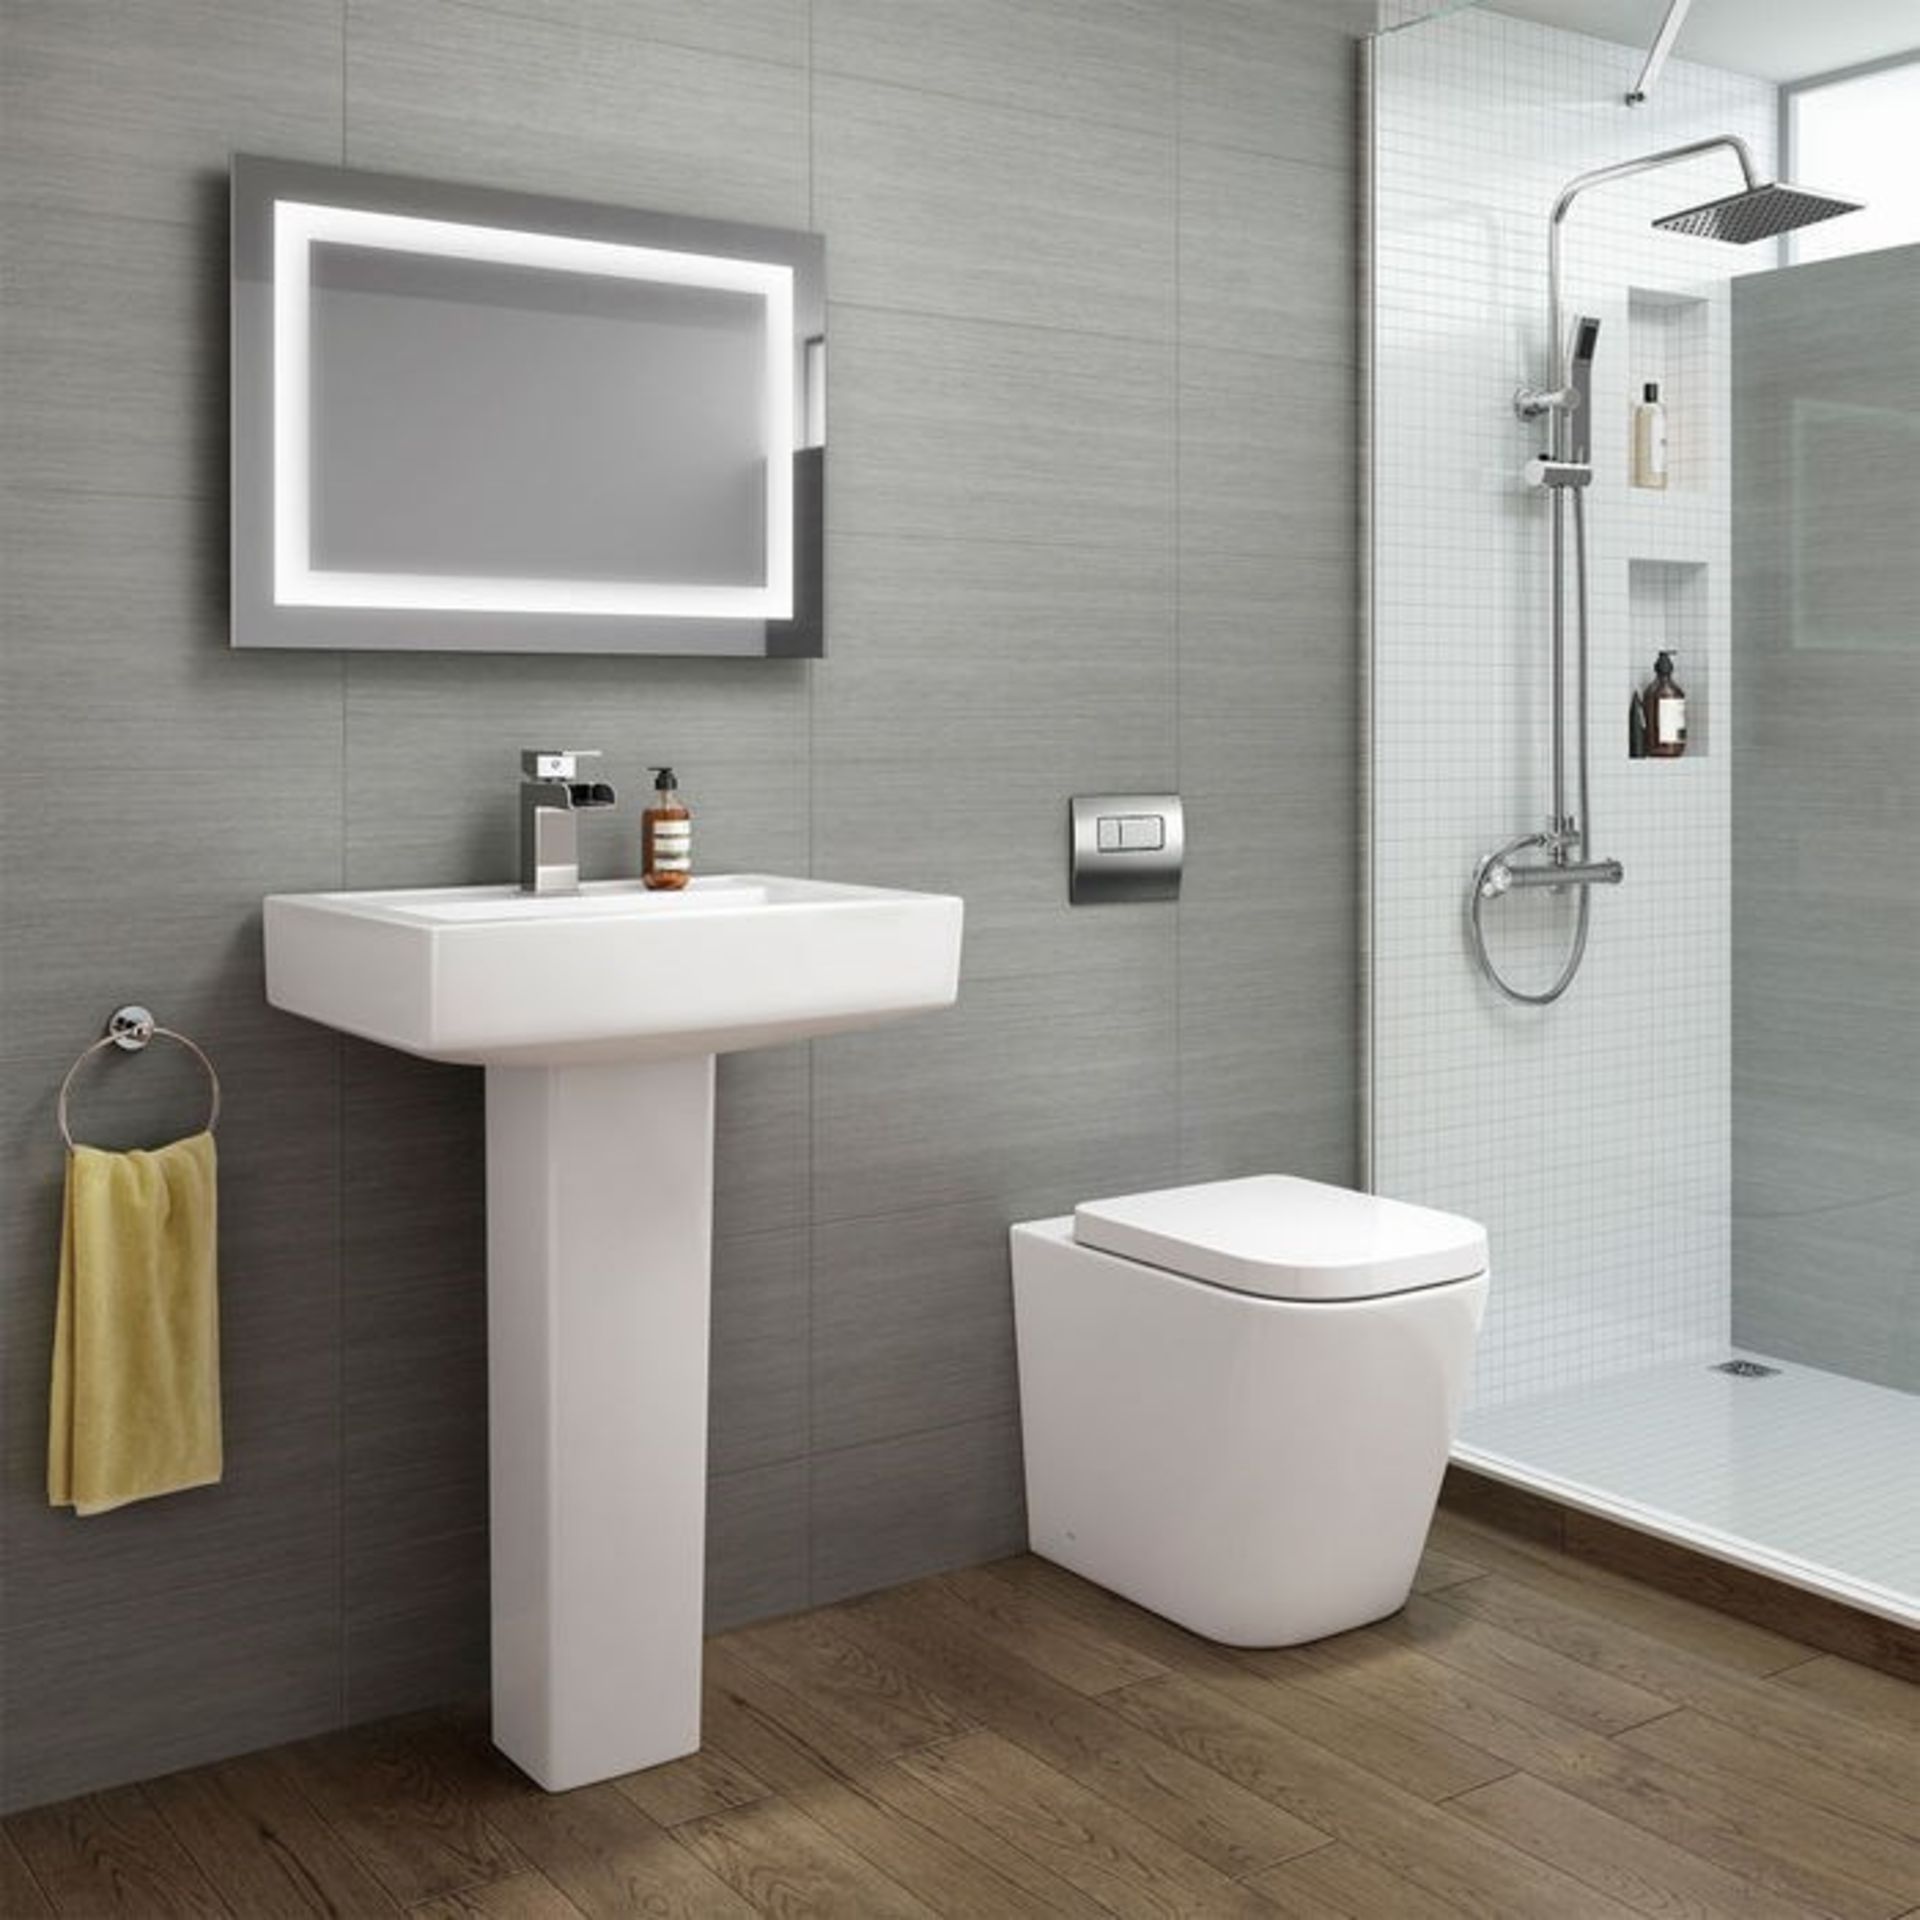 BRAND NEW BOXED Florence Rimless Back to Wall Toilet inc Luxury Soft Close Seat. RRP £349.99 ... - Image 2 of 2